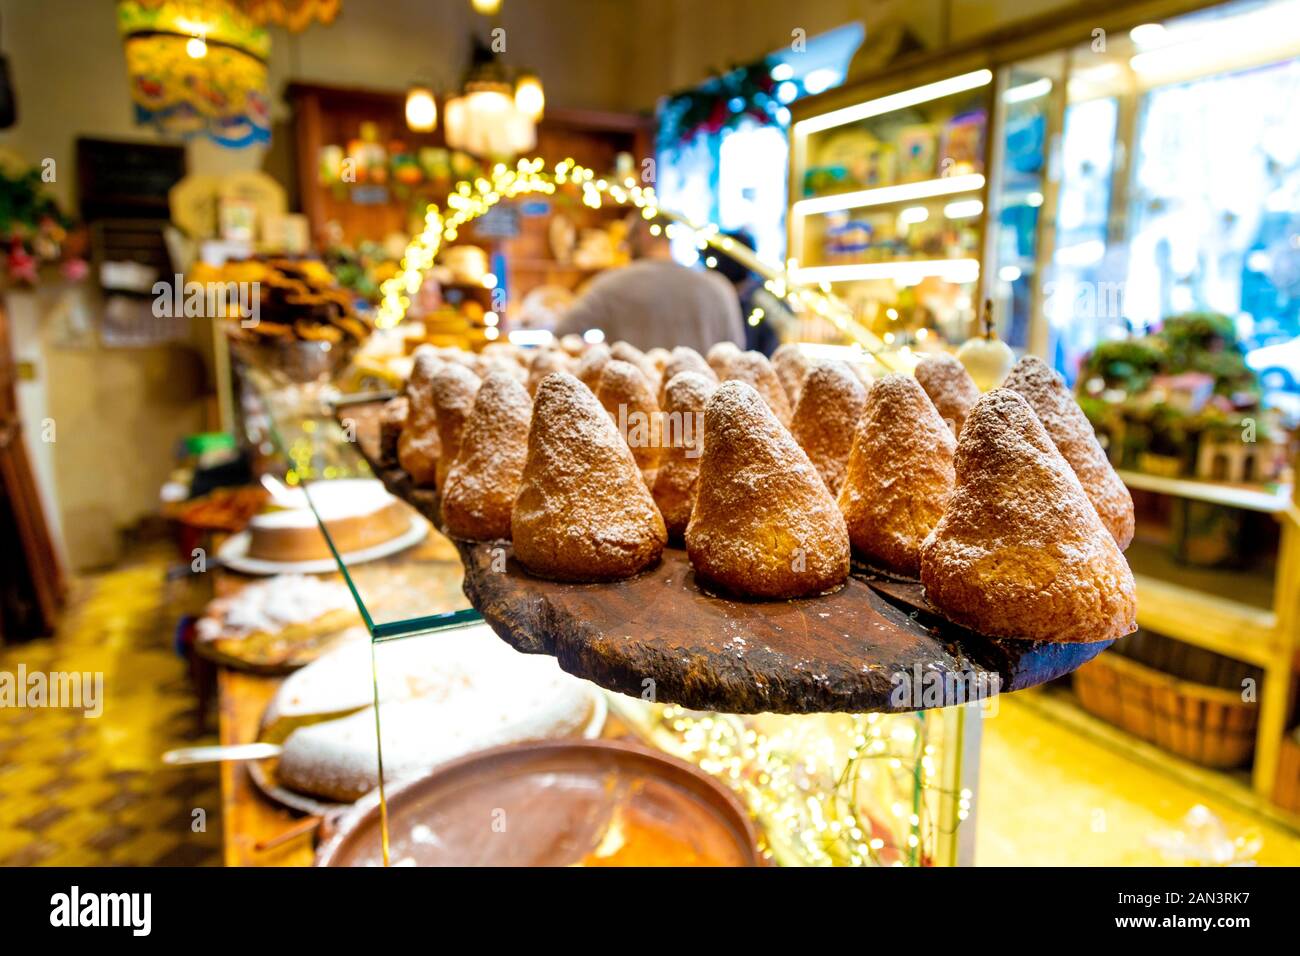 Cone shaped pastries at famous bakery Forn des Teatre in Palma, Mallorca, Spain Stock Photo